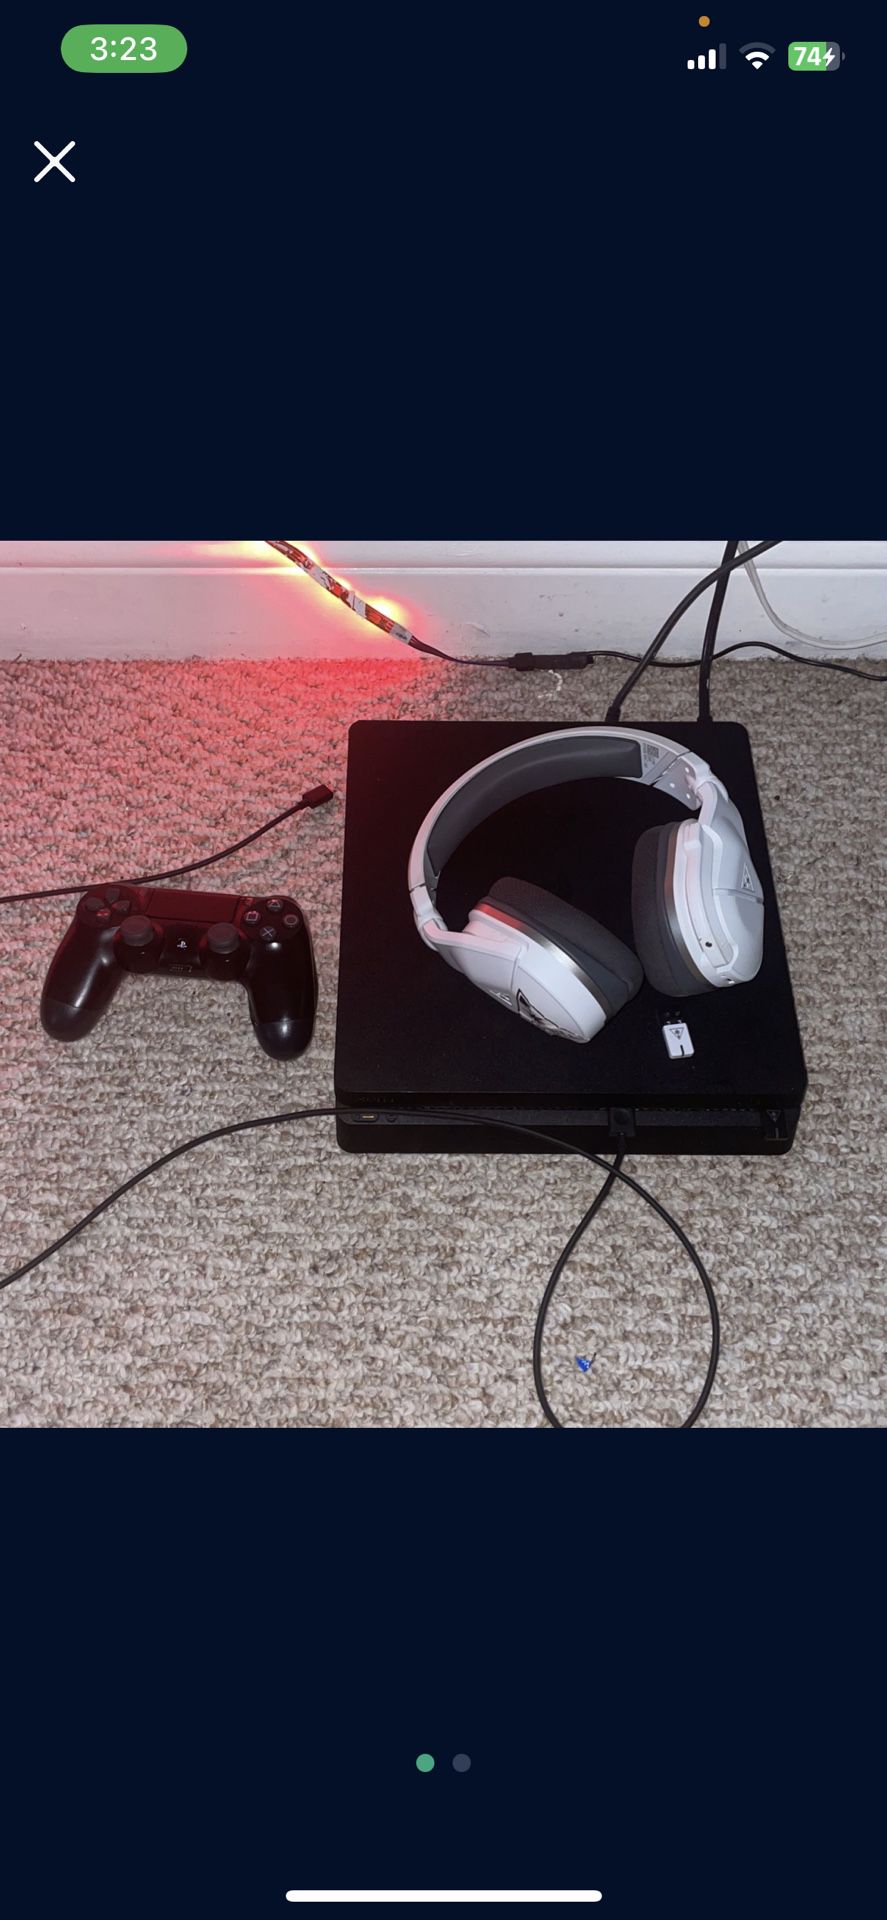 Brand New PS4 Slim d1tb Comes With Controller And Turtle Beach, Bluetooth Headset And Cords Best Offer 